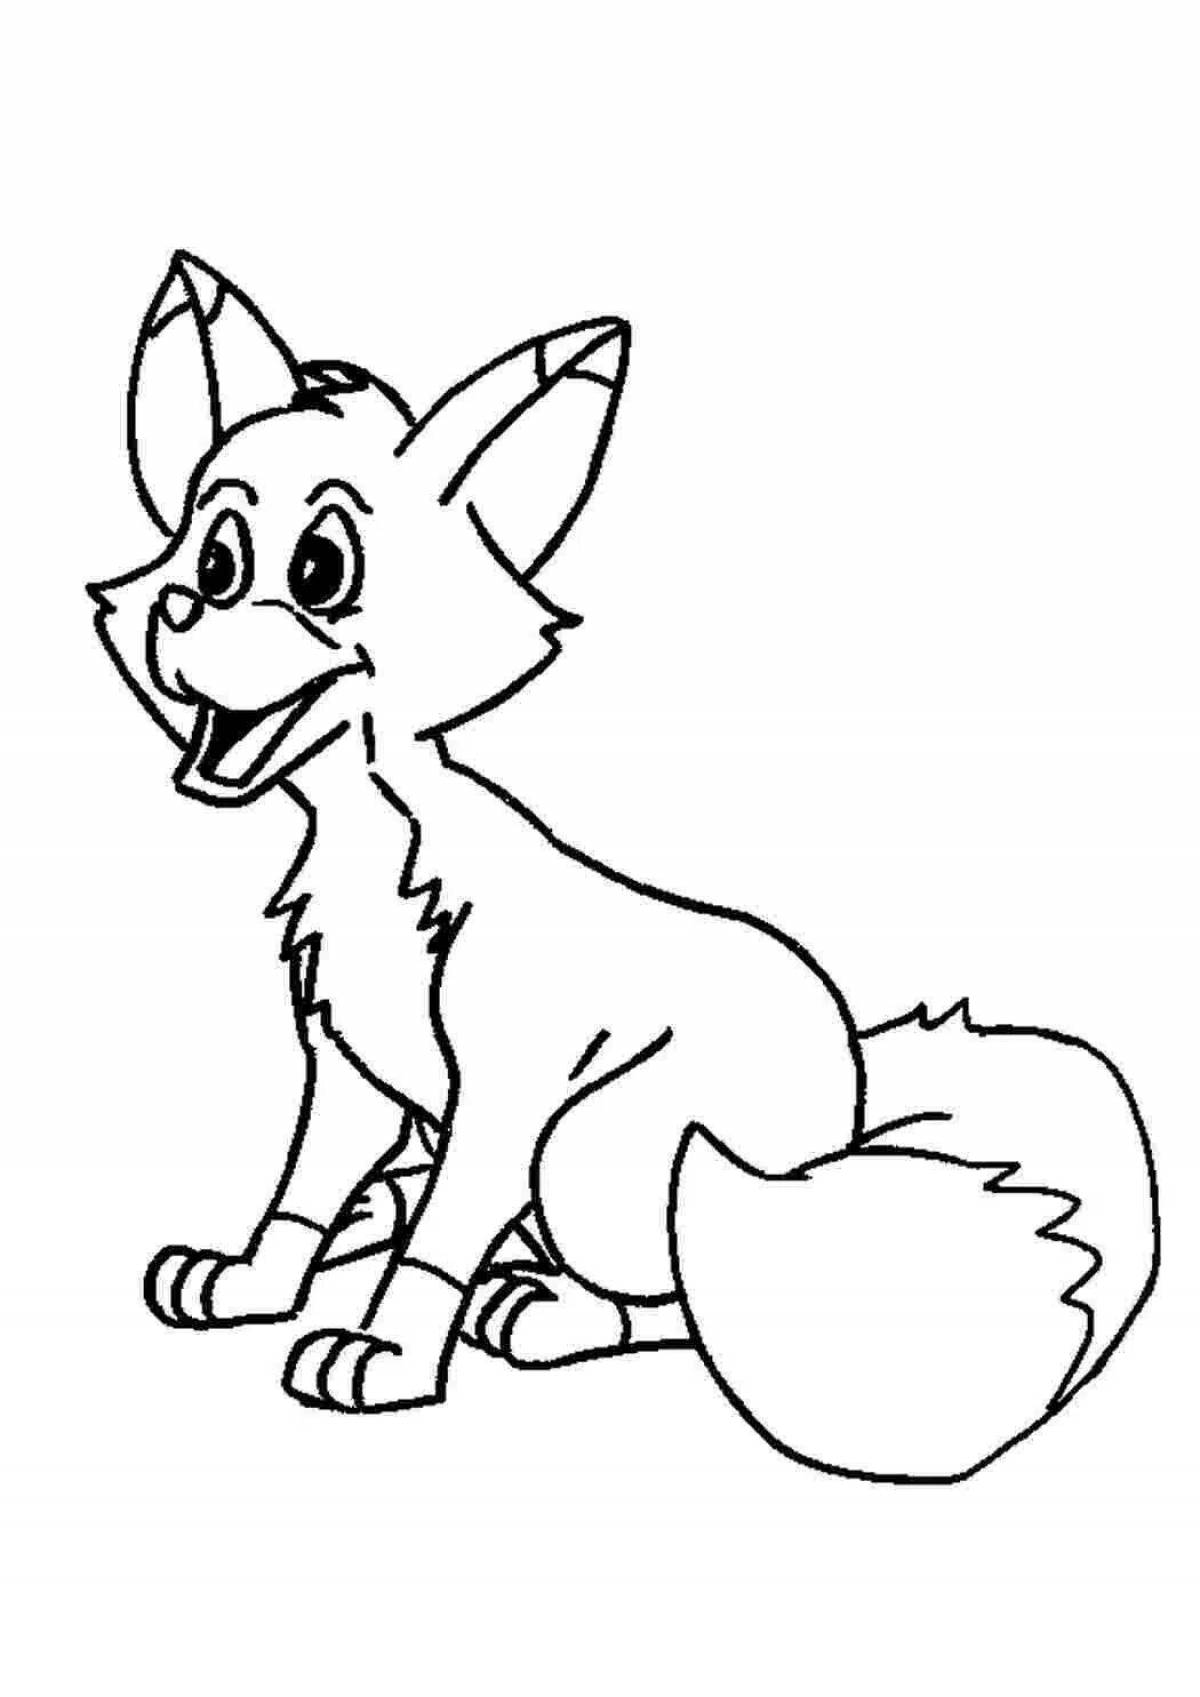 Sparkling fox coloring book for children 2-3 years old